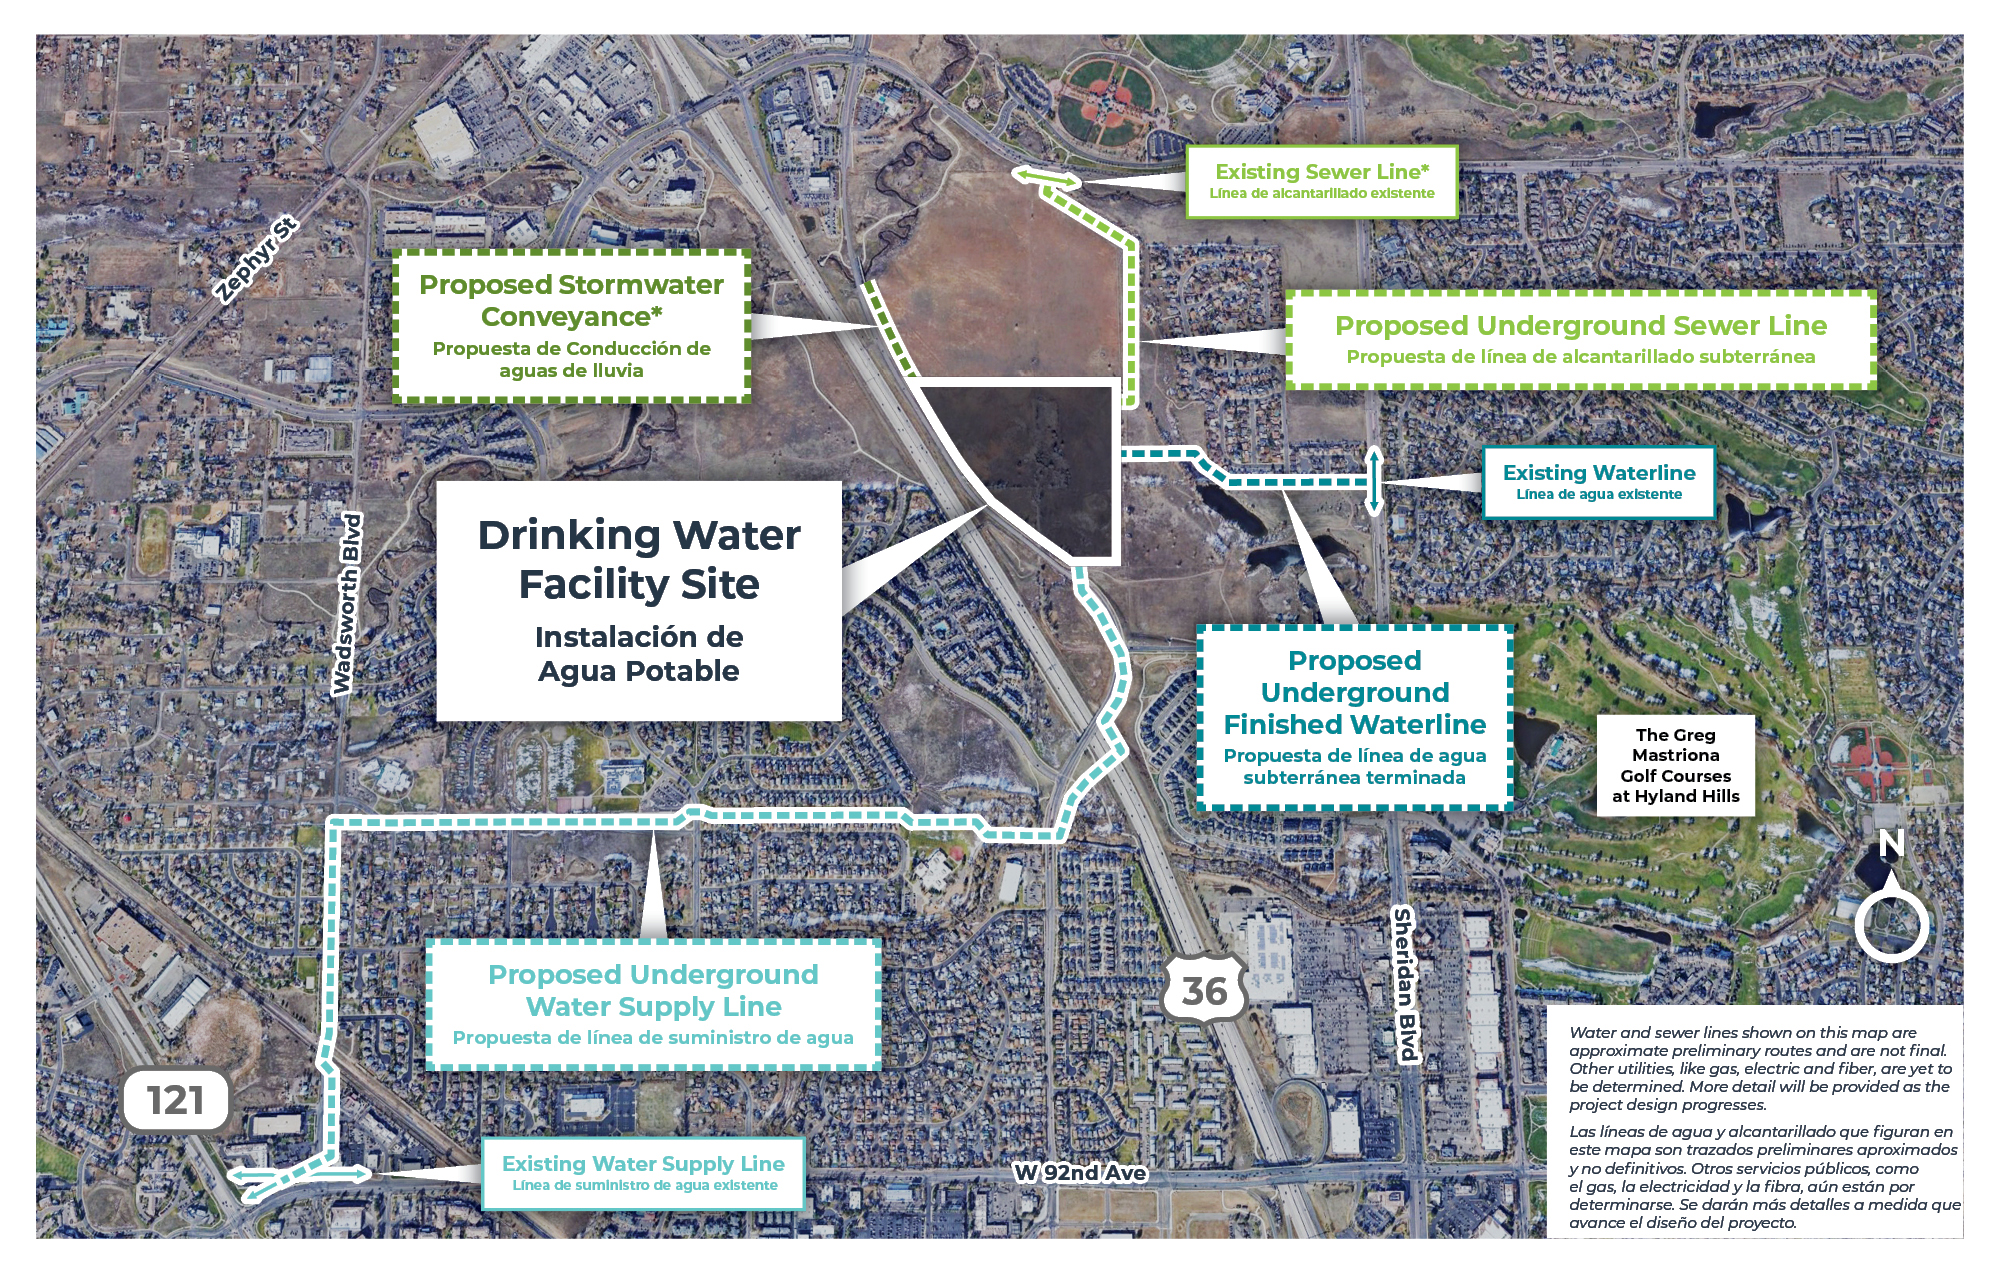 Map showing the drinking water facility on the east side of Westminster Boulevard between 98th and 104th Avenues with the proposed water supply line connecting on the south side of the facility and extending southwest to connect with the existing water supply lines. It also shows the proposed sewer line and finished waterlines extending east from the facility site and connecting to existing sewer and waterlines.